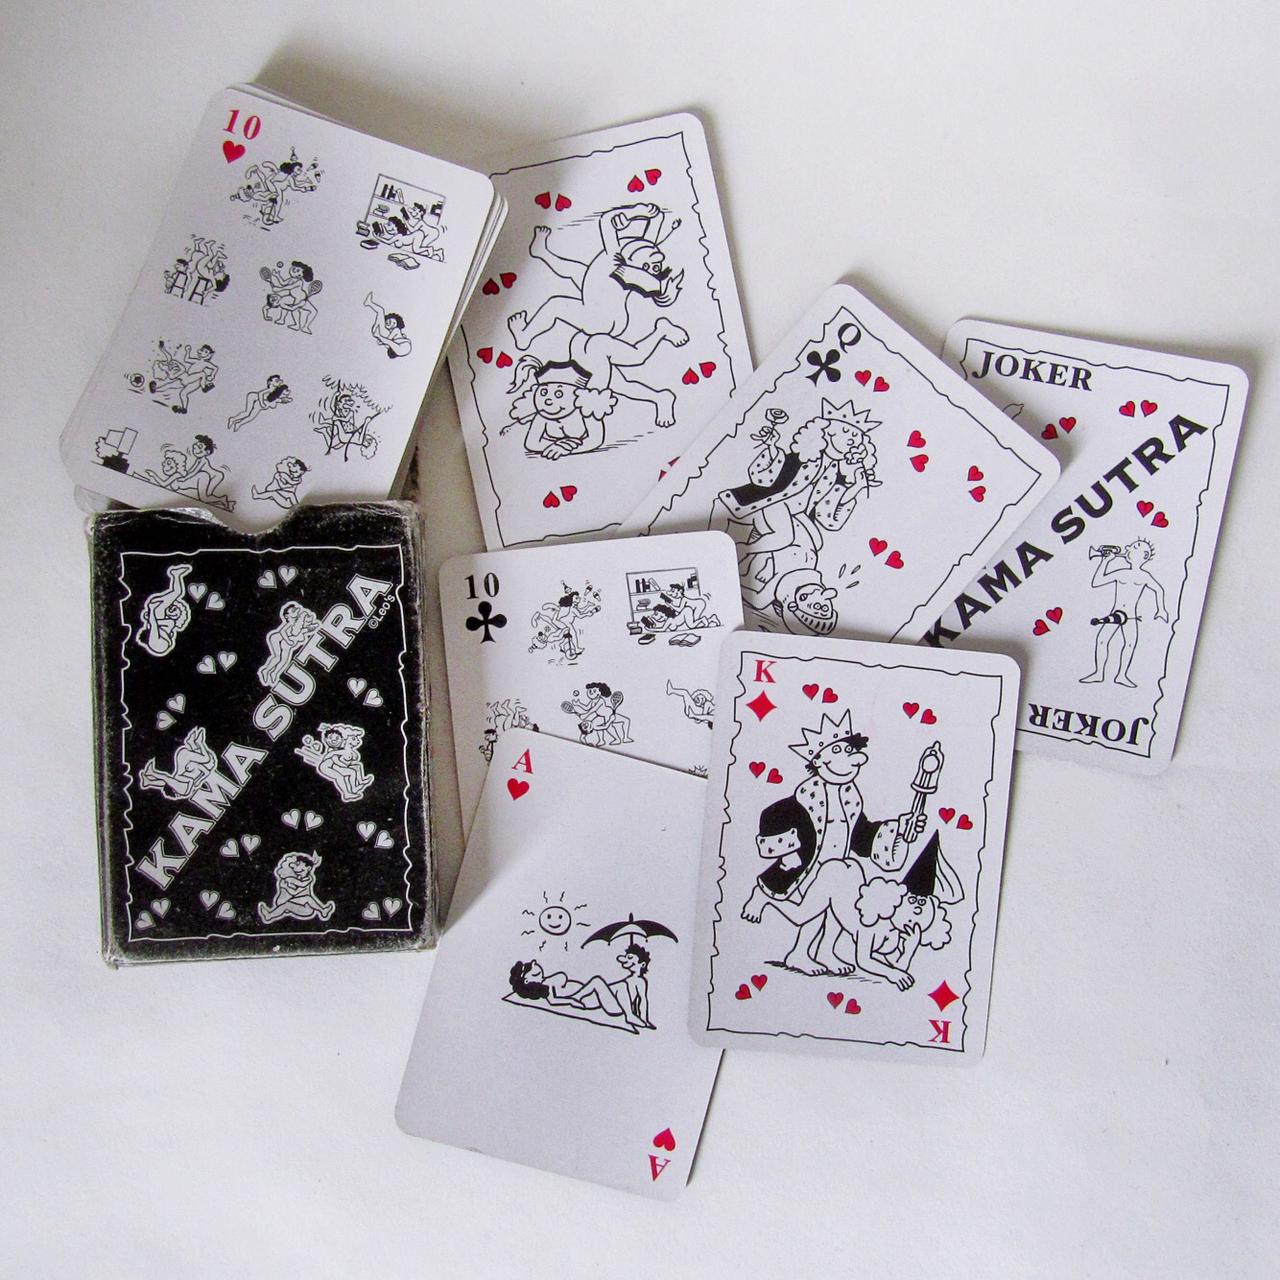 KAMA SUTRA PLAYING CARDS